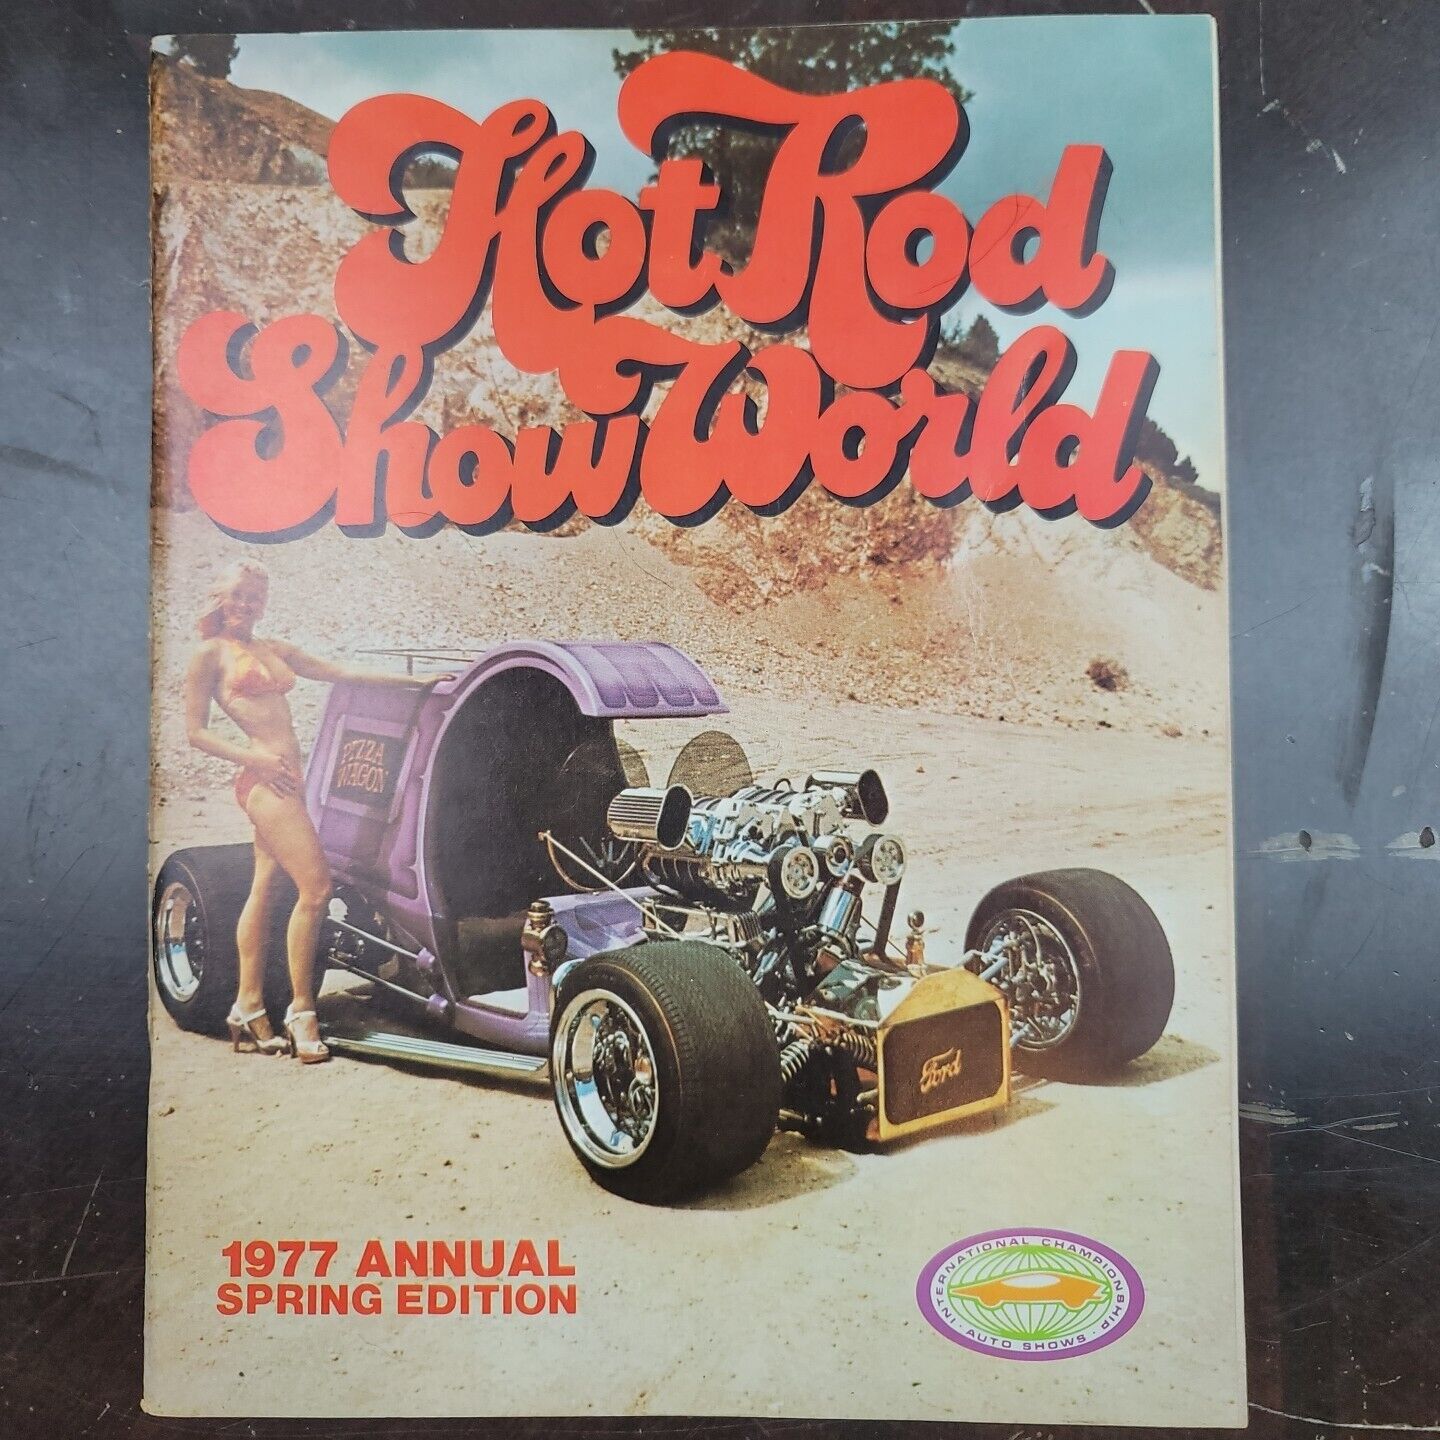 Vintage Hot Rod Show World 1977 Annual Spring Edition Featuring Pizza Wagon